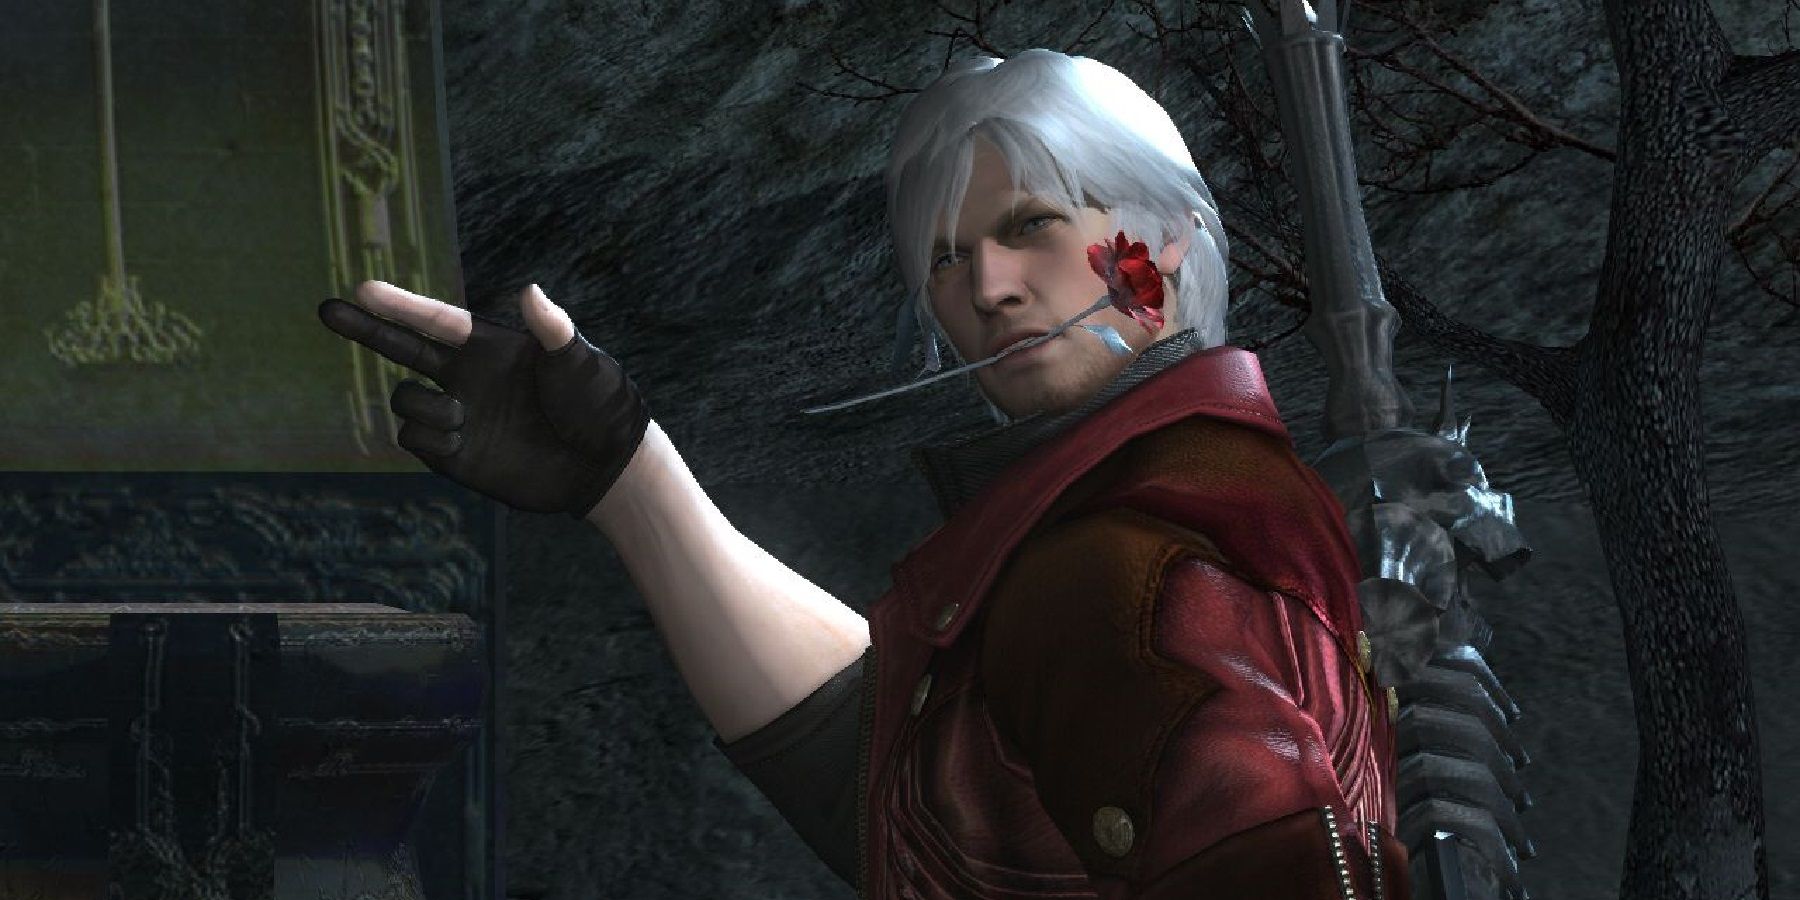 Is Dante, from the Devil May Cry series, based on a real demon